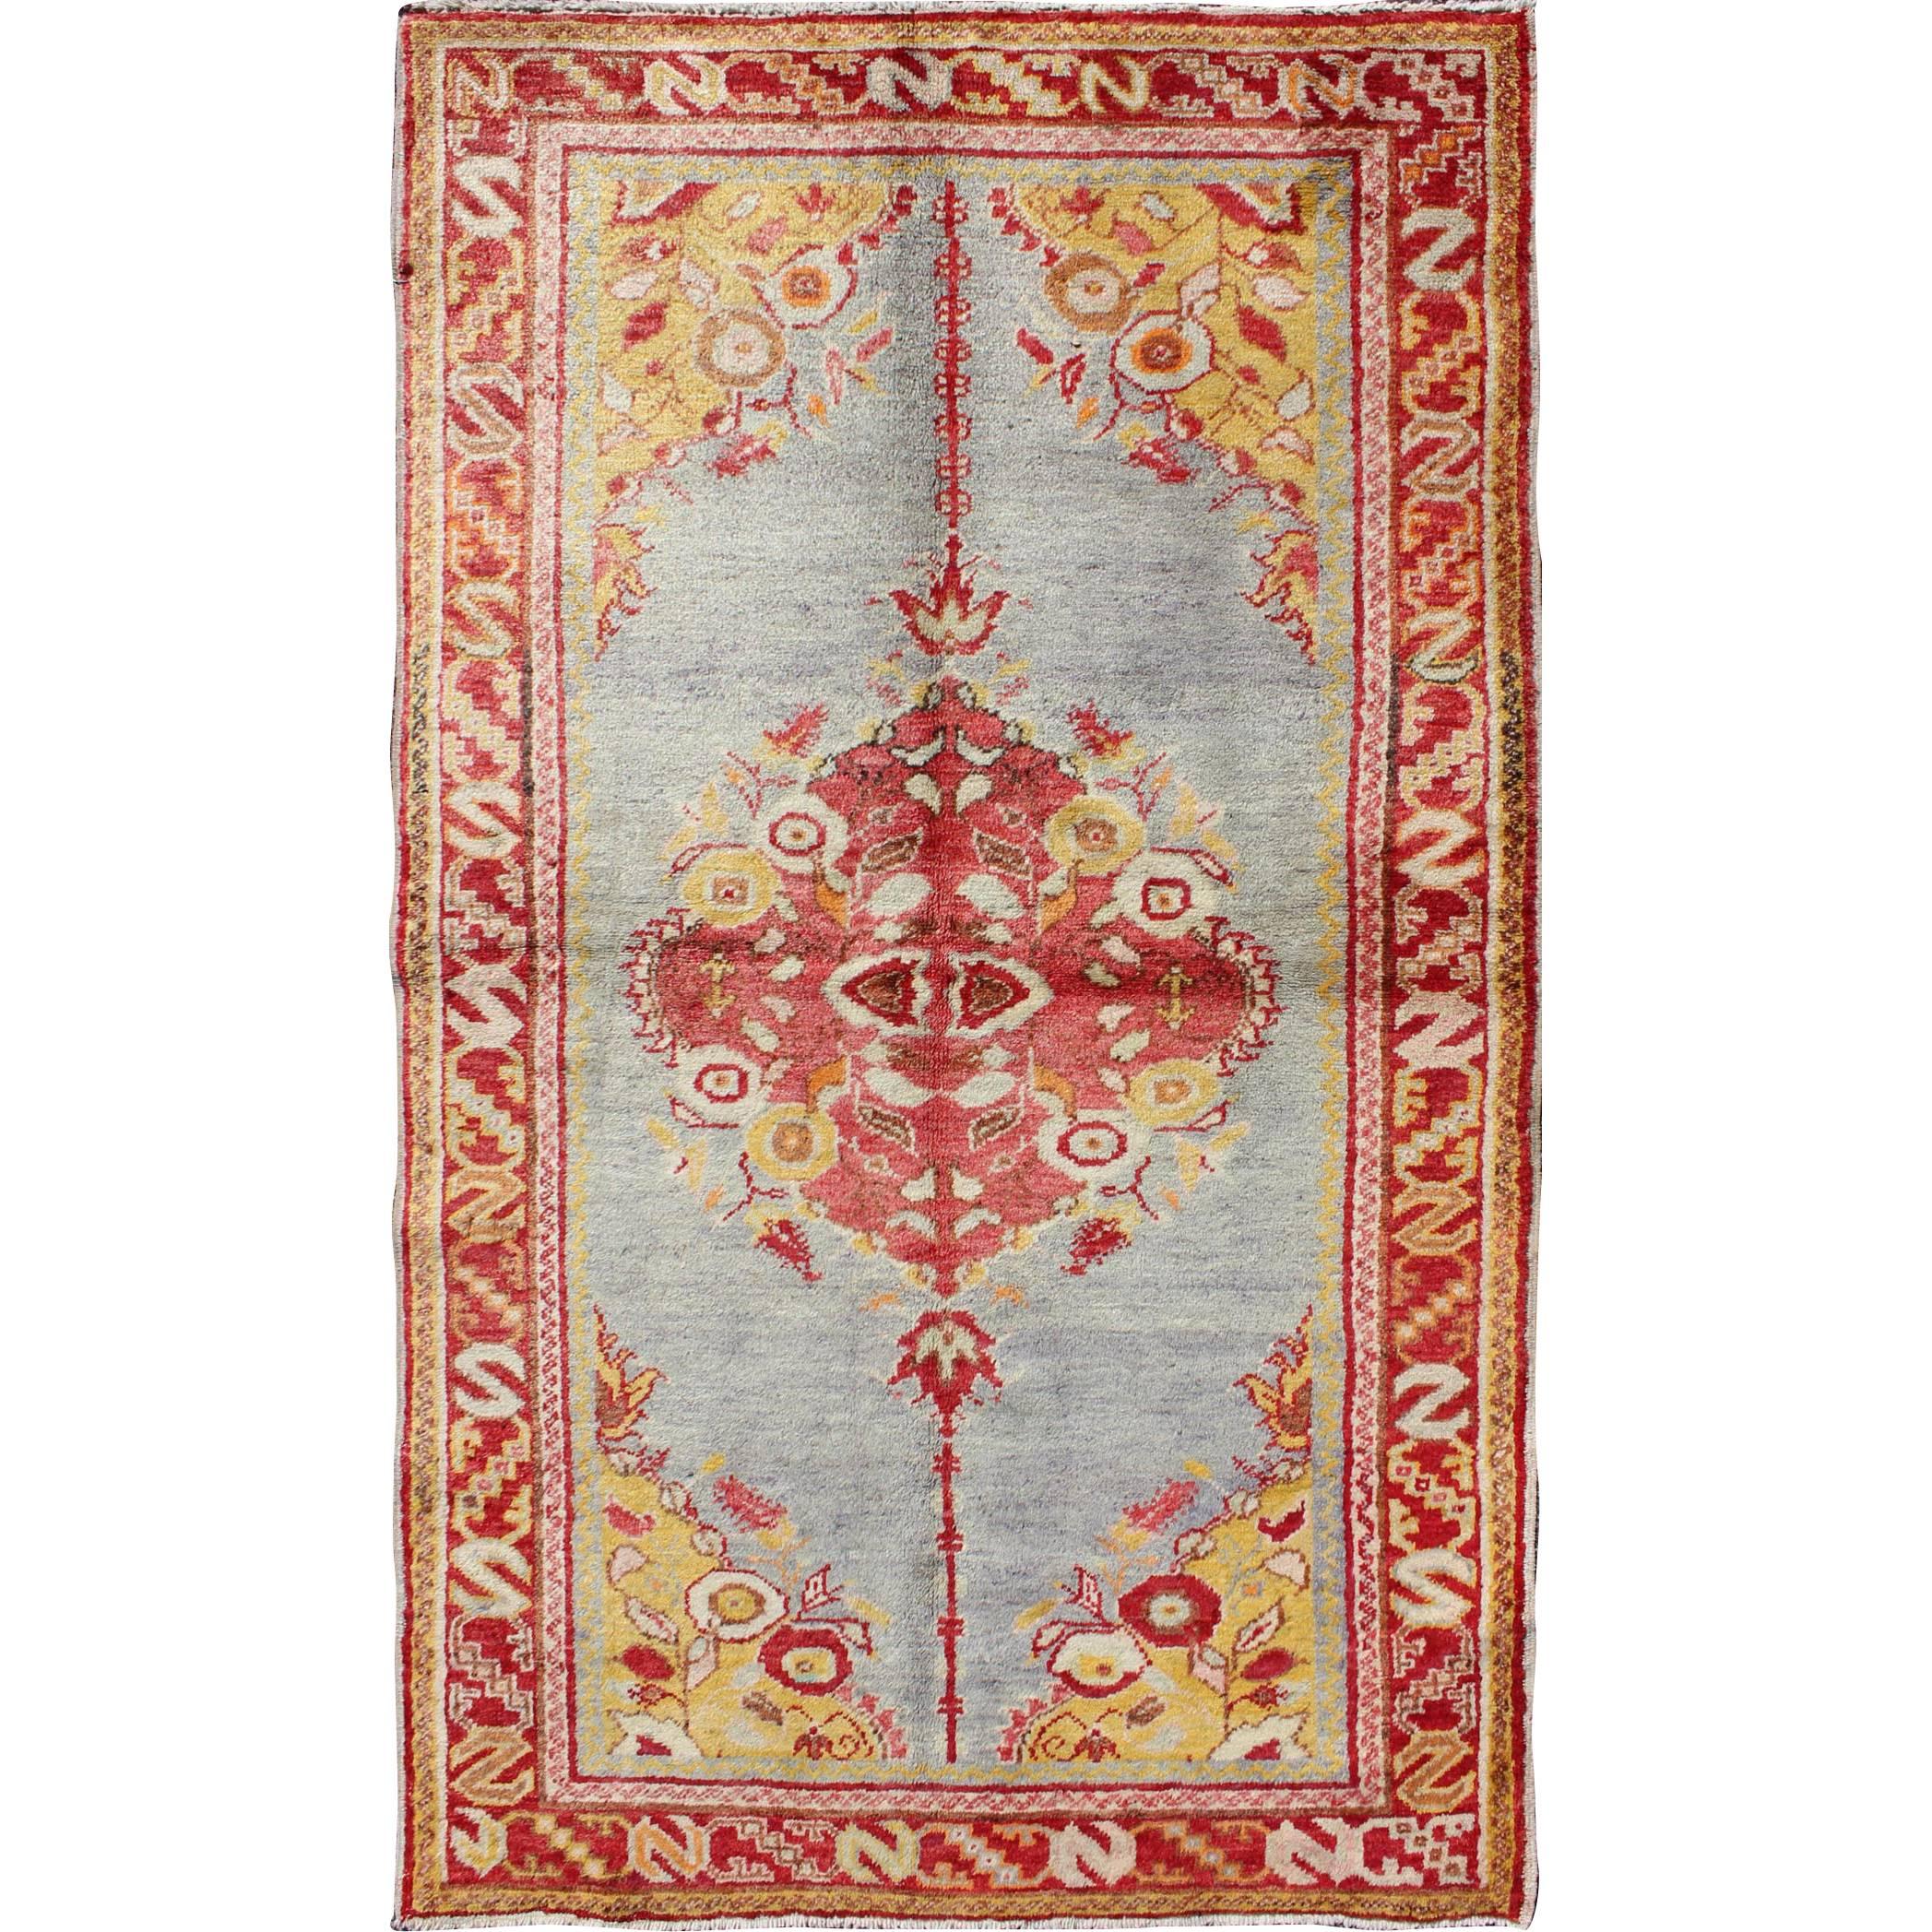 Vintage Turkish Oushak Rug with Floral Medallion & Cornices on Light Gray Field